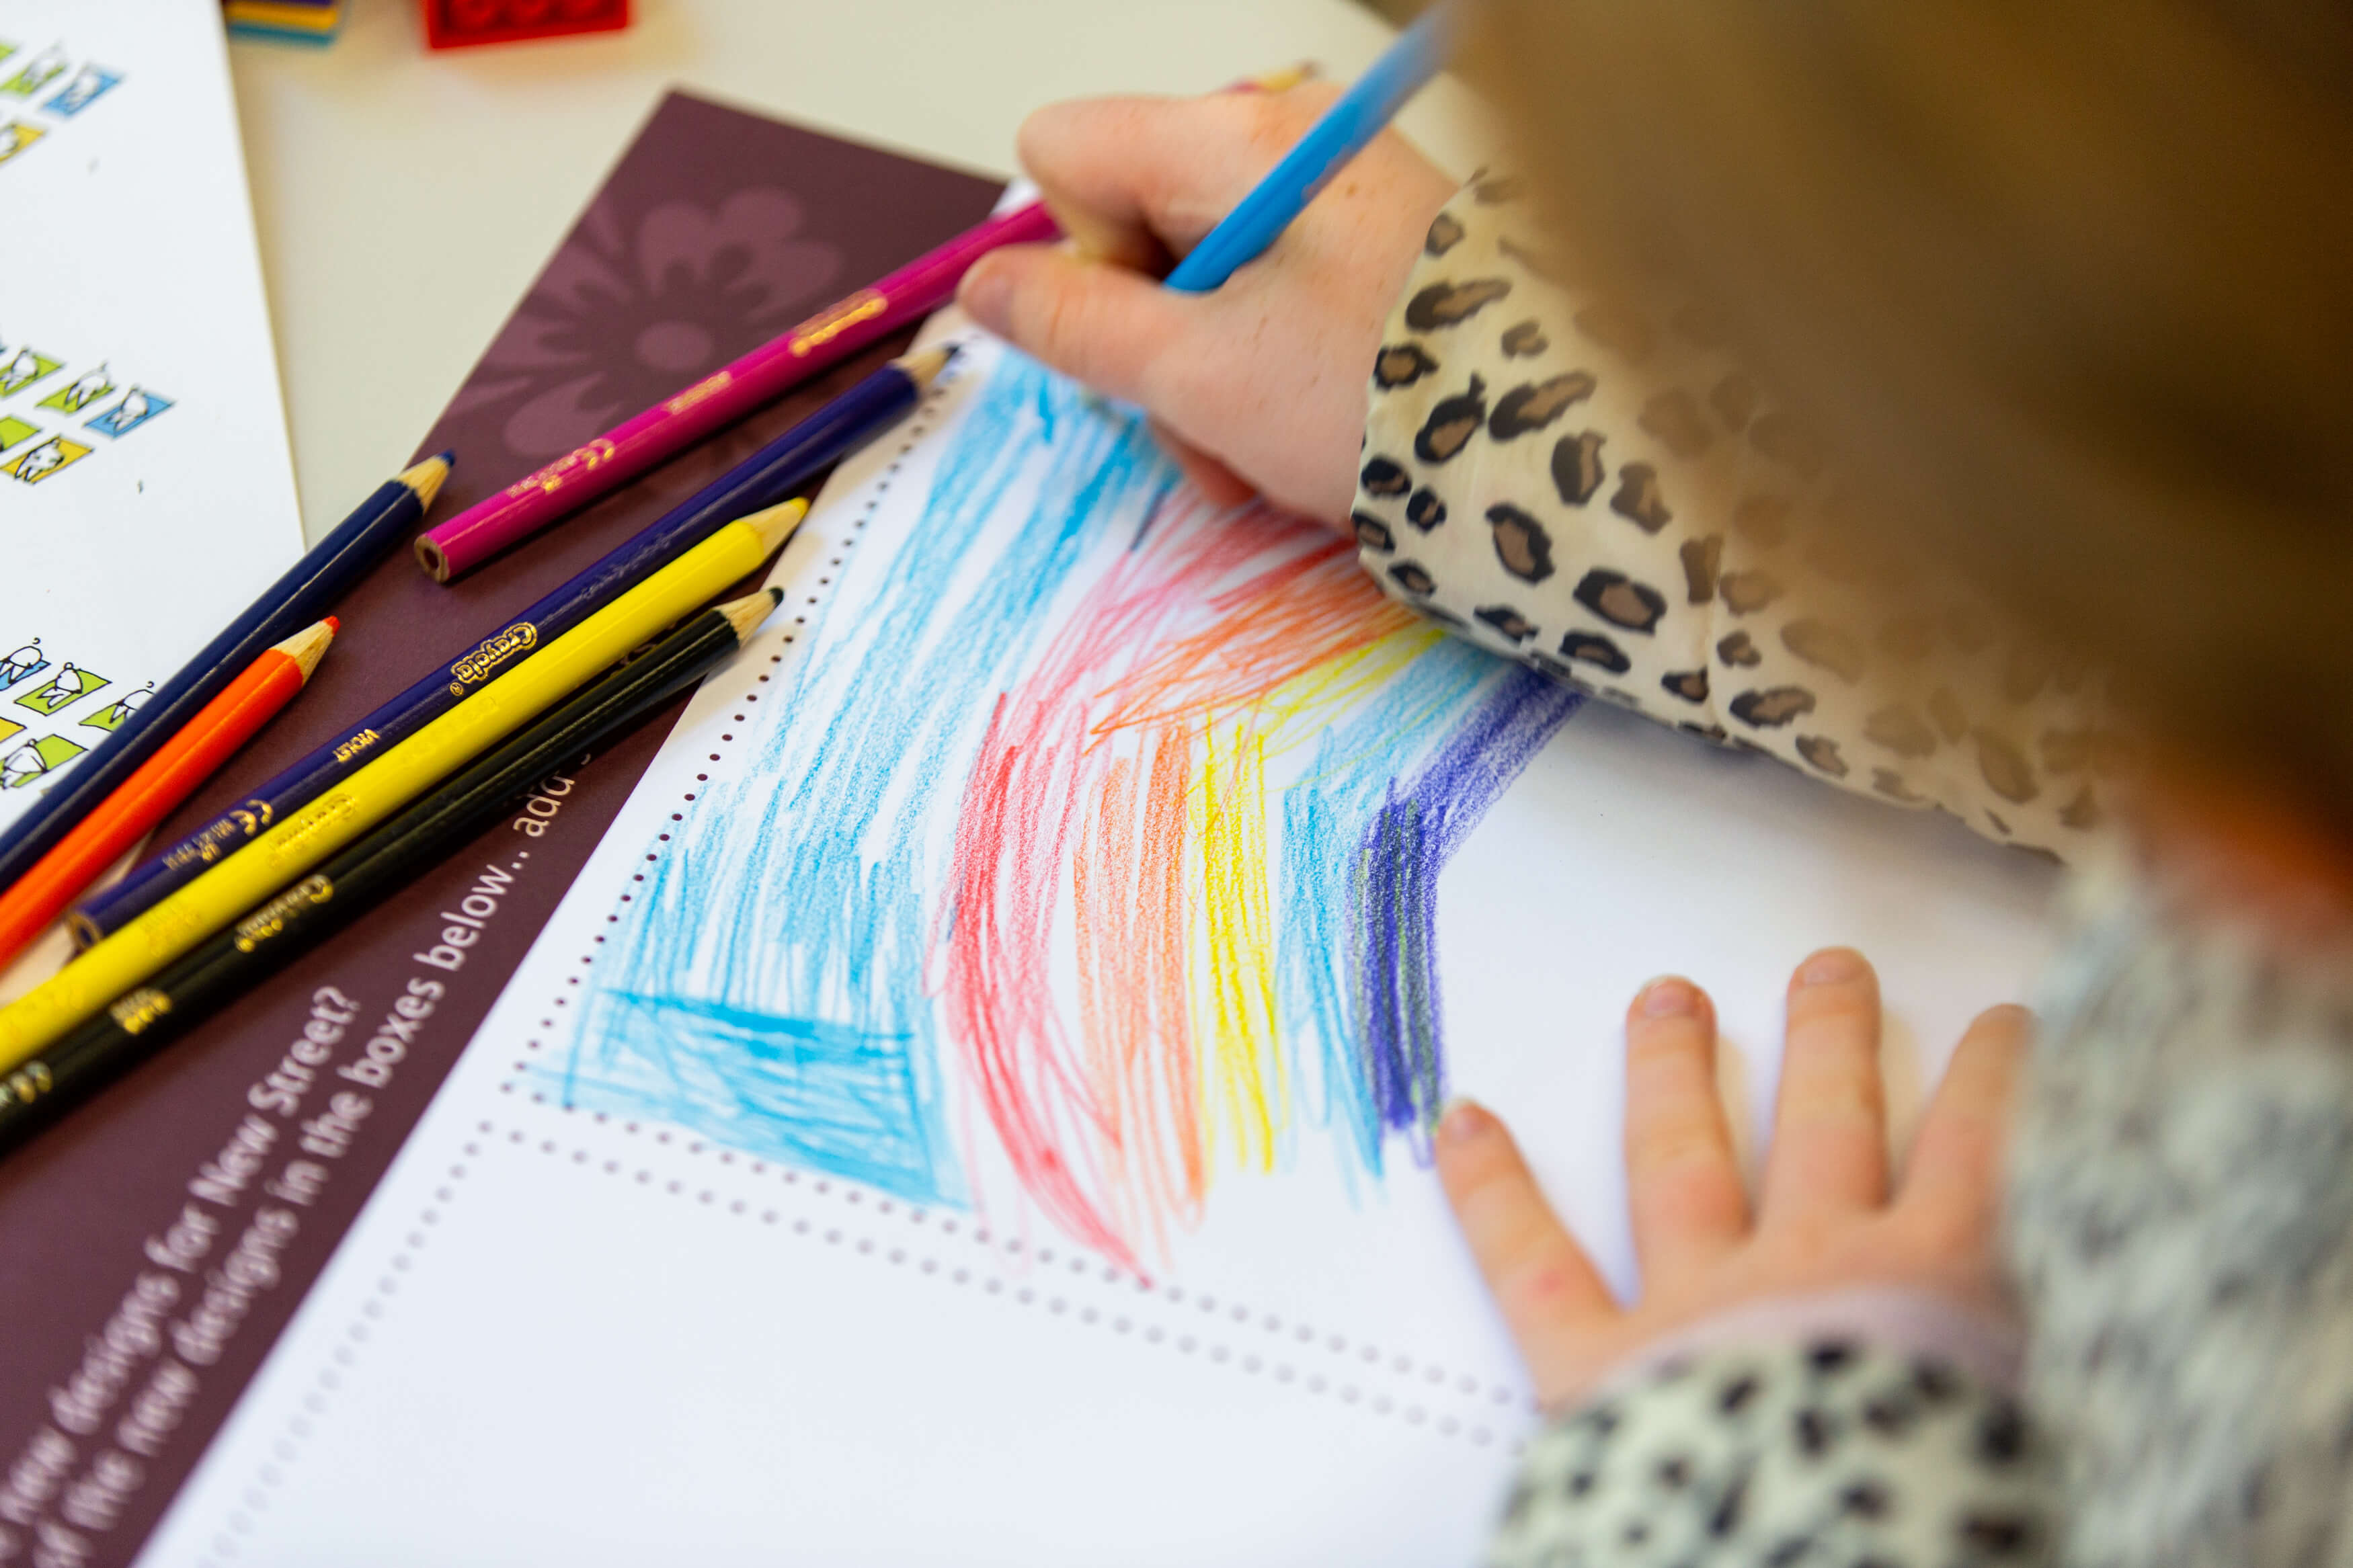 Overhead view of a young girl drawing a rainbow and colouring a blue sky on a workshop activity sheet. Other colouring pencils and stickers sit on the table beside her